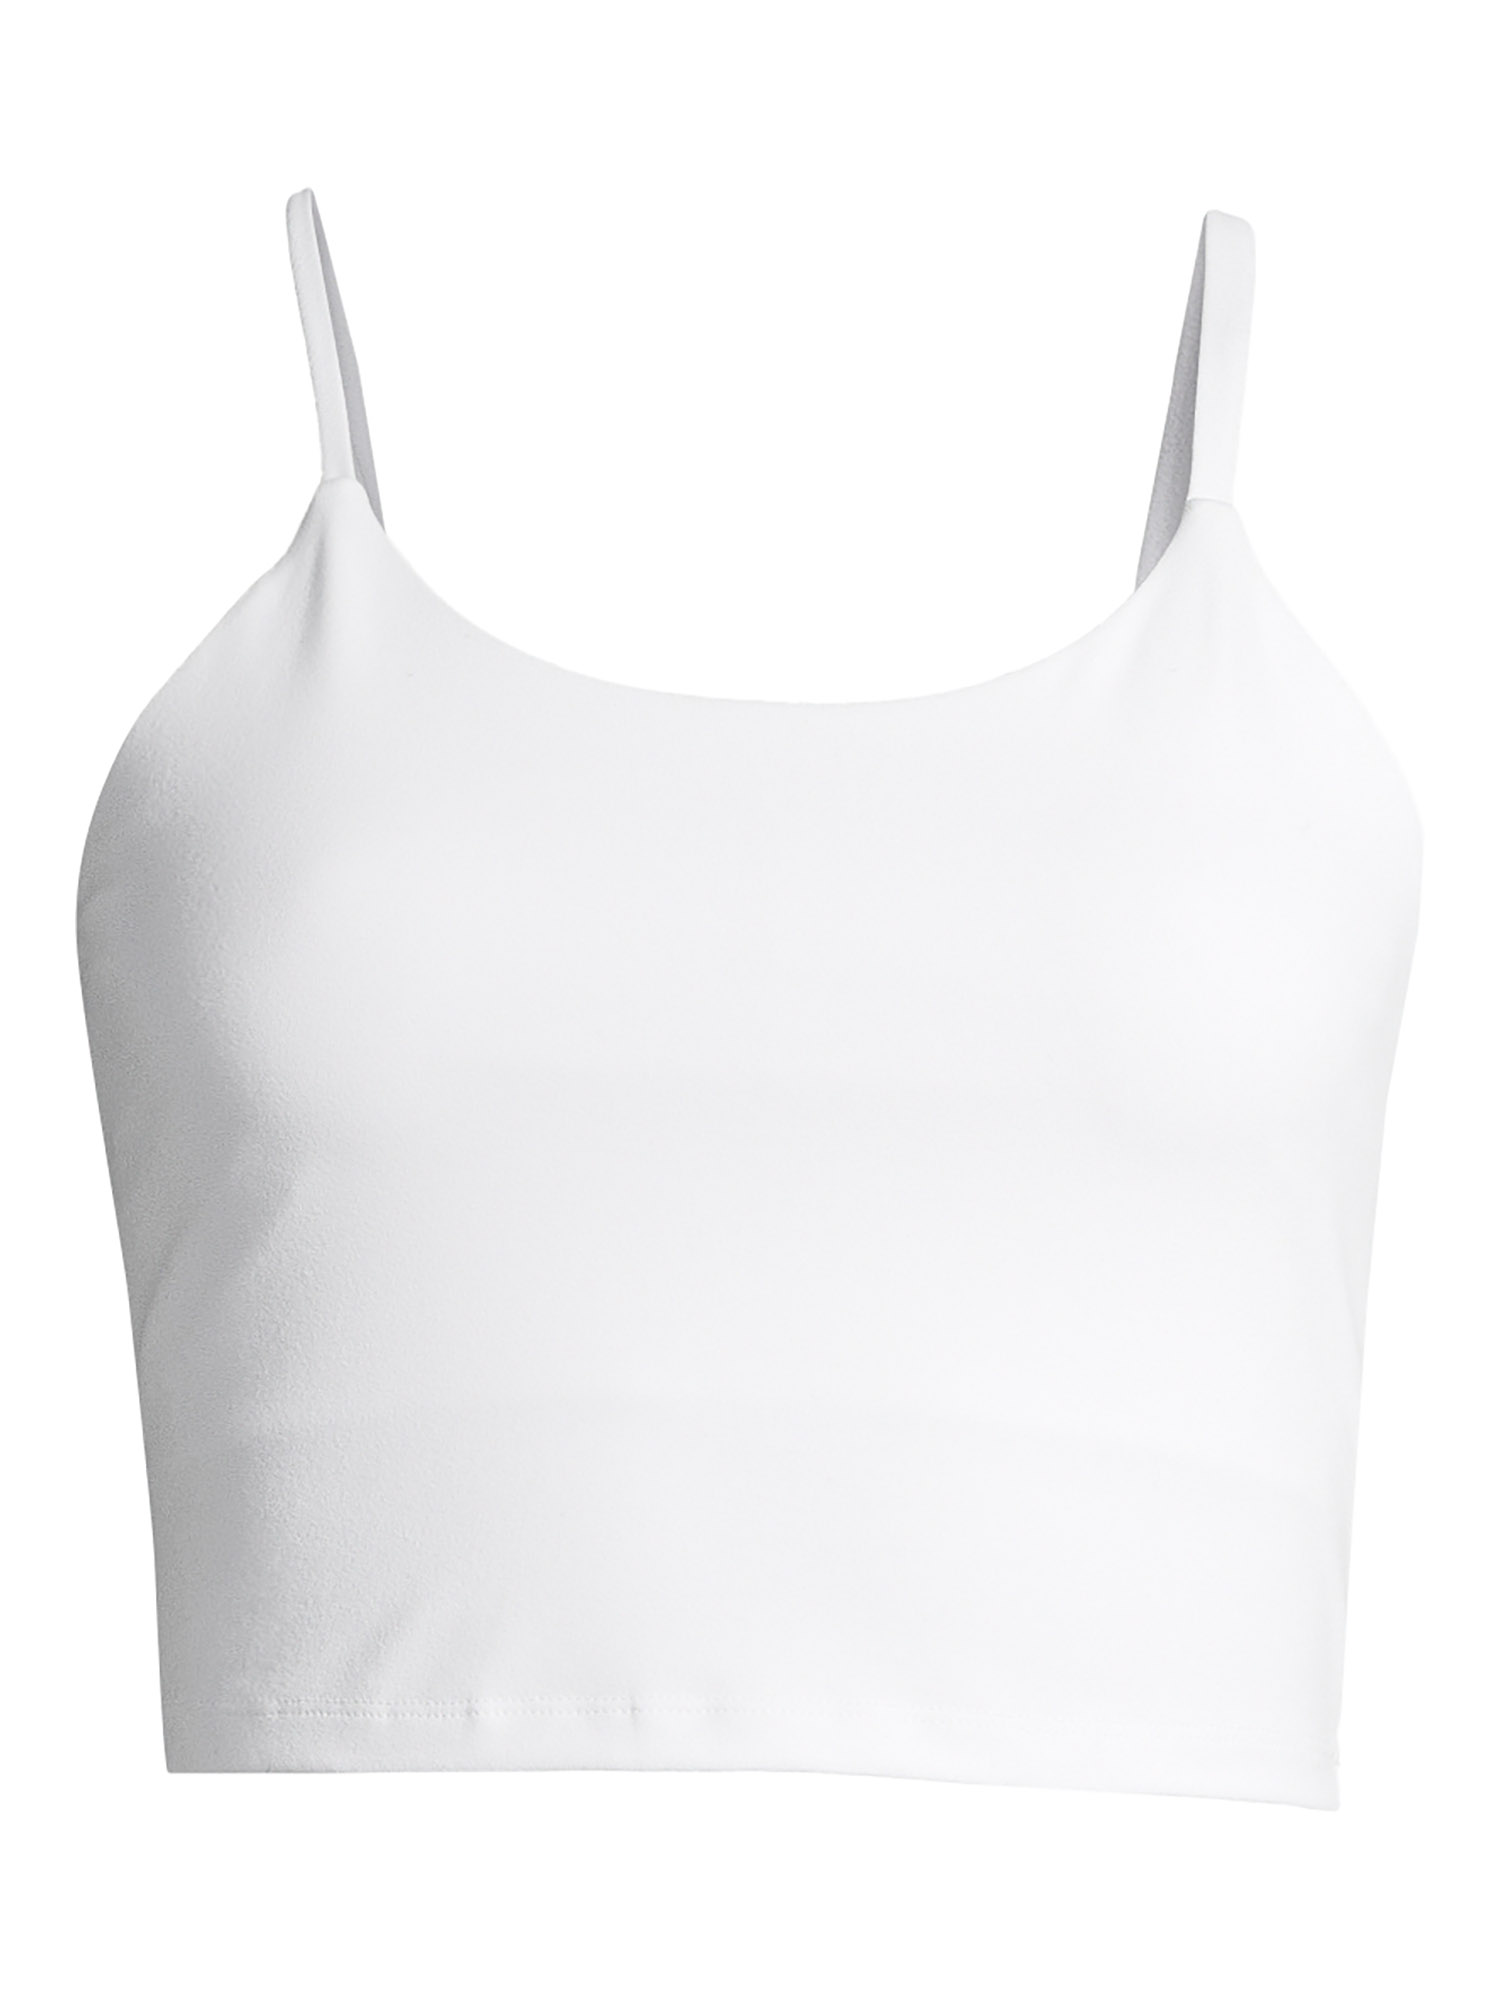 Avia Low Impact Sports Crop with Shelf Bra and Removable Pads - image 5 of 7